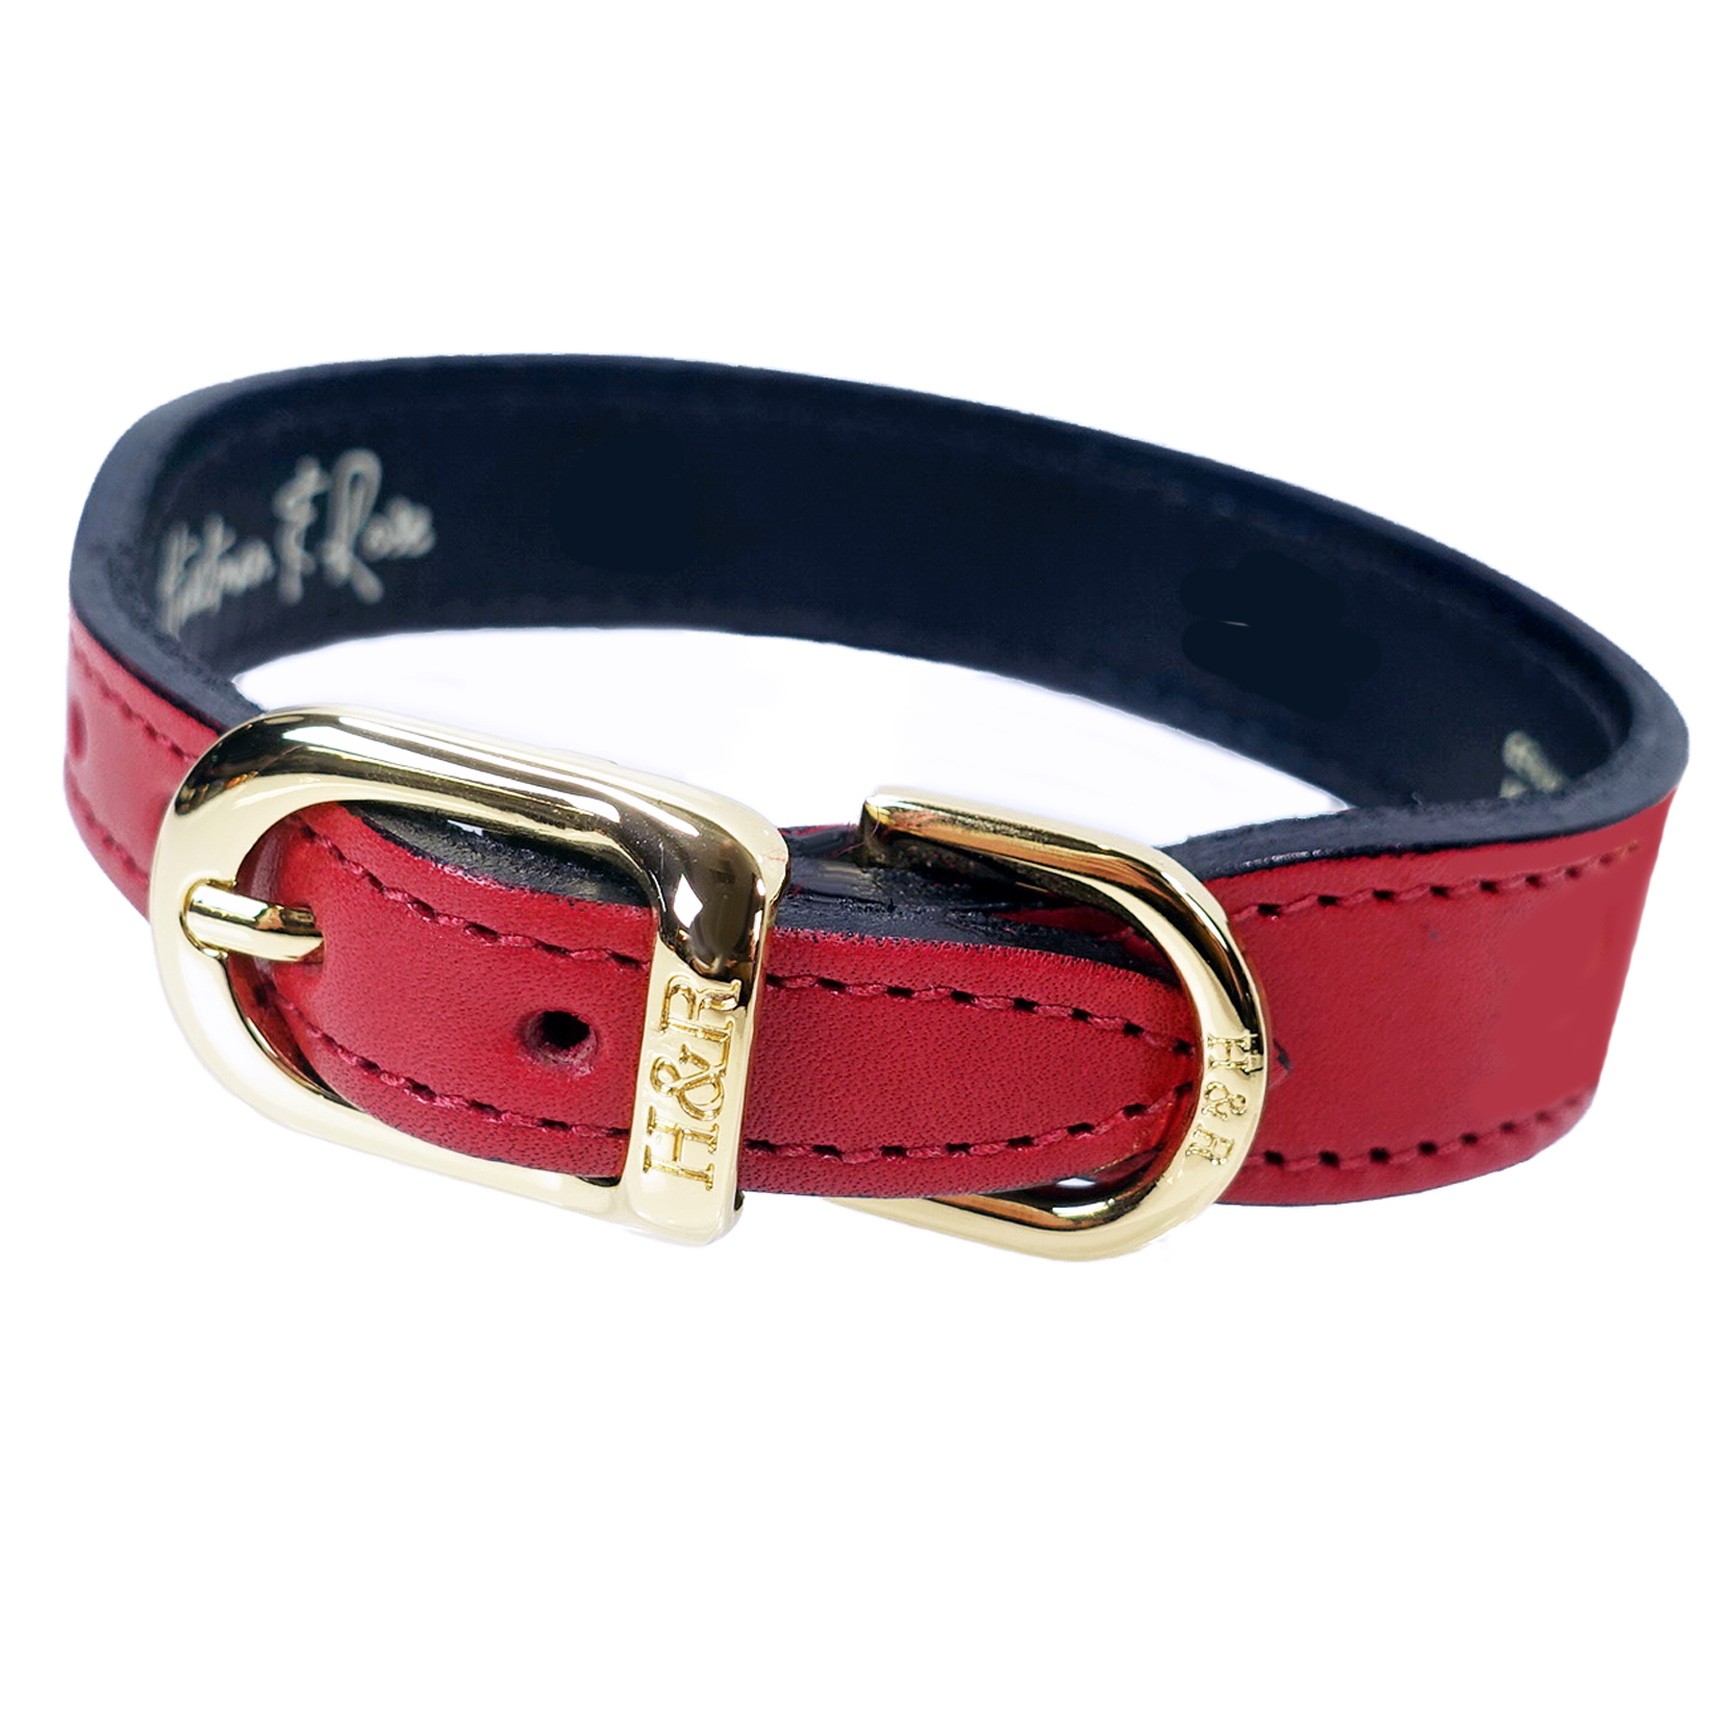 Gucci Poochie Leather Dog Leash Black  Designer Dog Collars and Leashes at